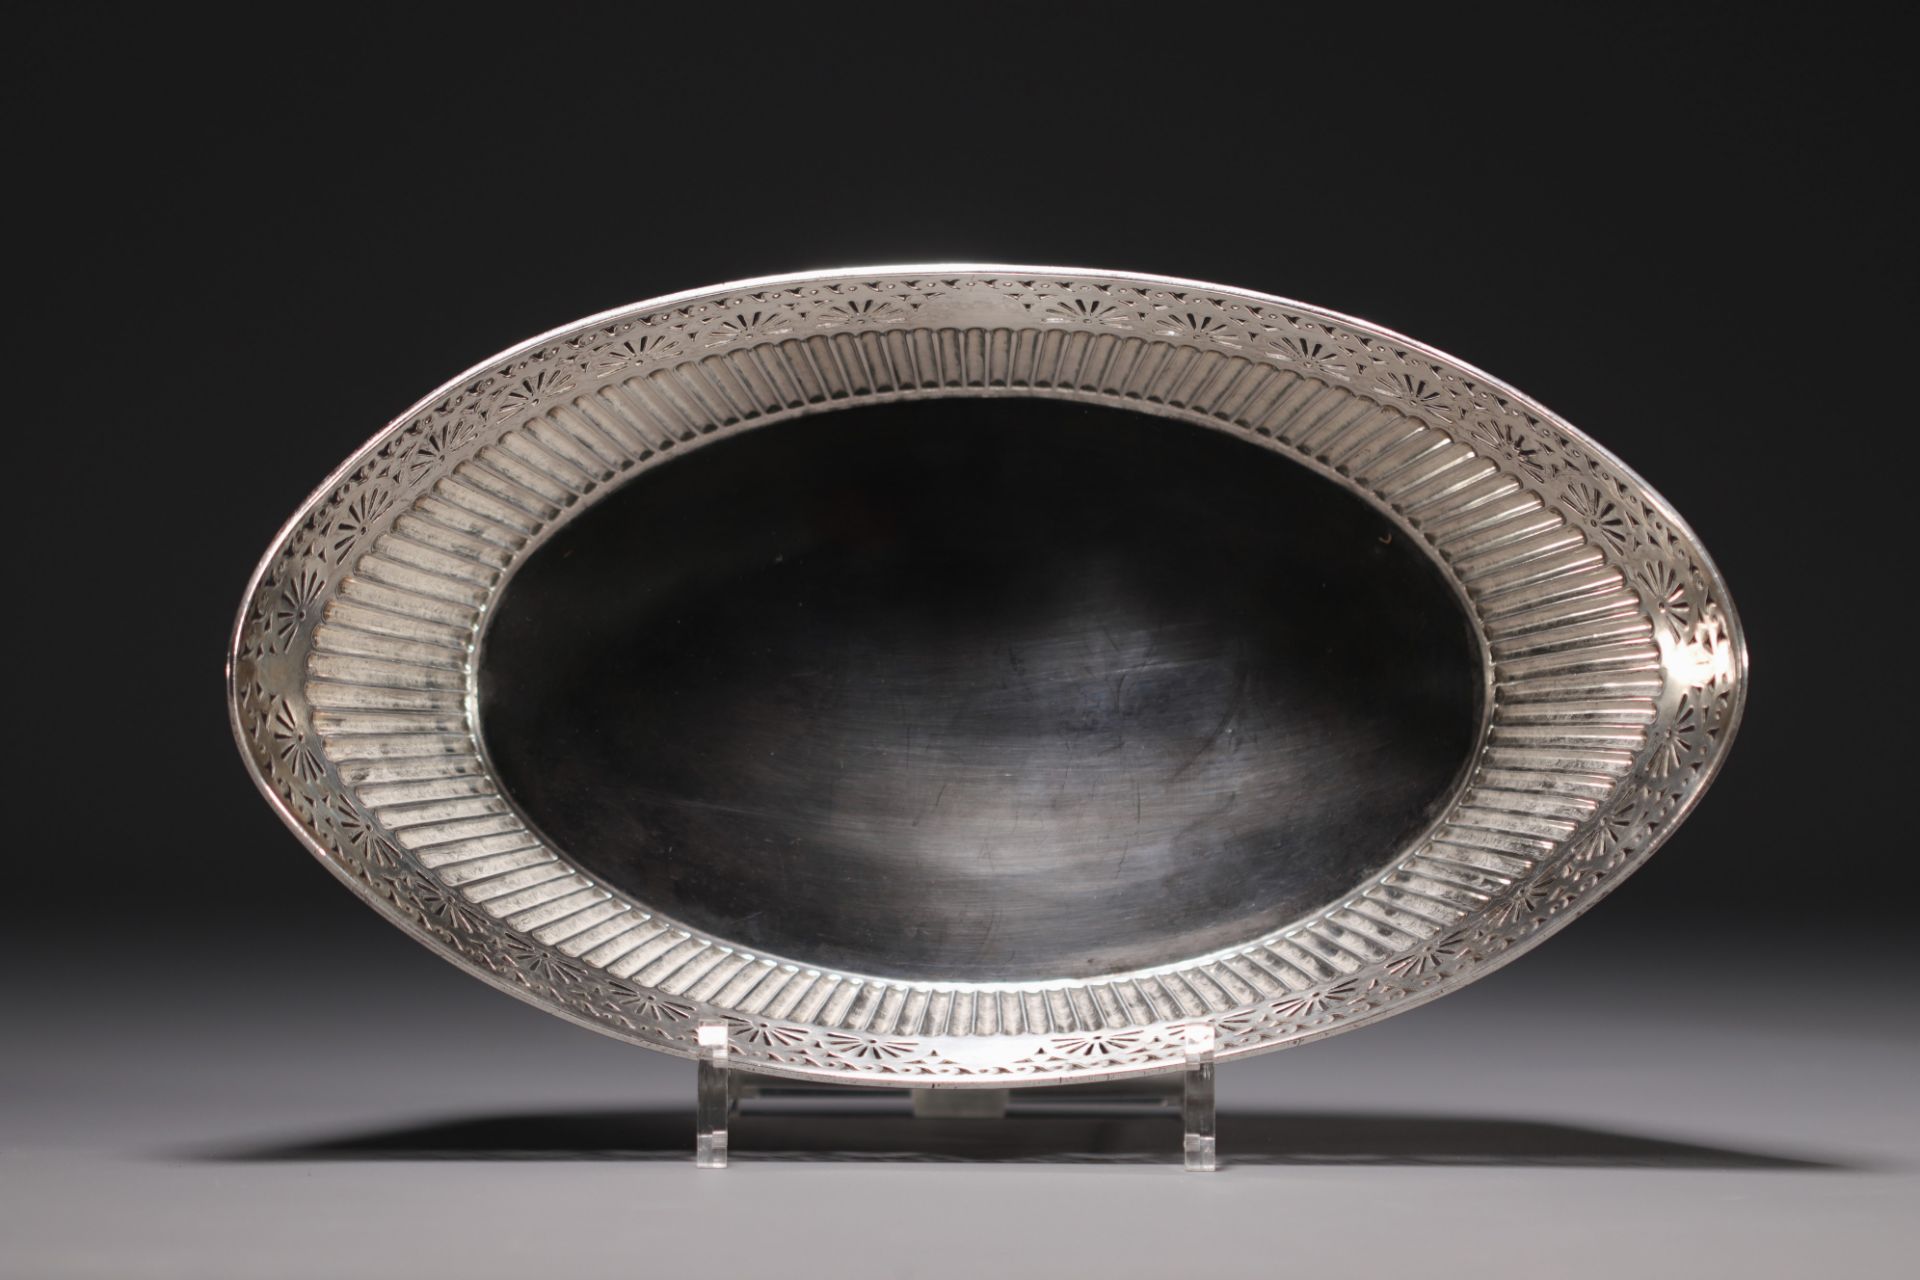 Bread basket in solid silver, hallmarked JD&S. - Image 5 of 6